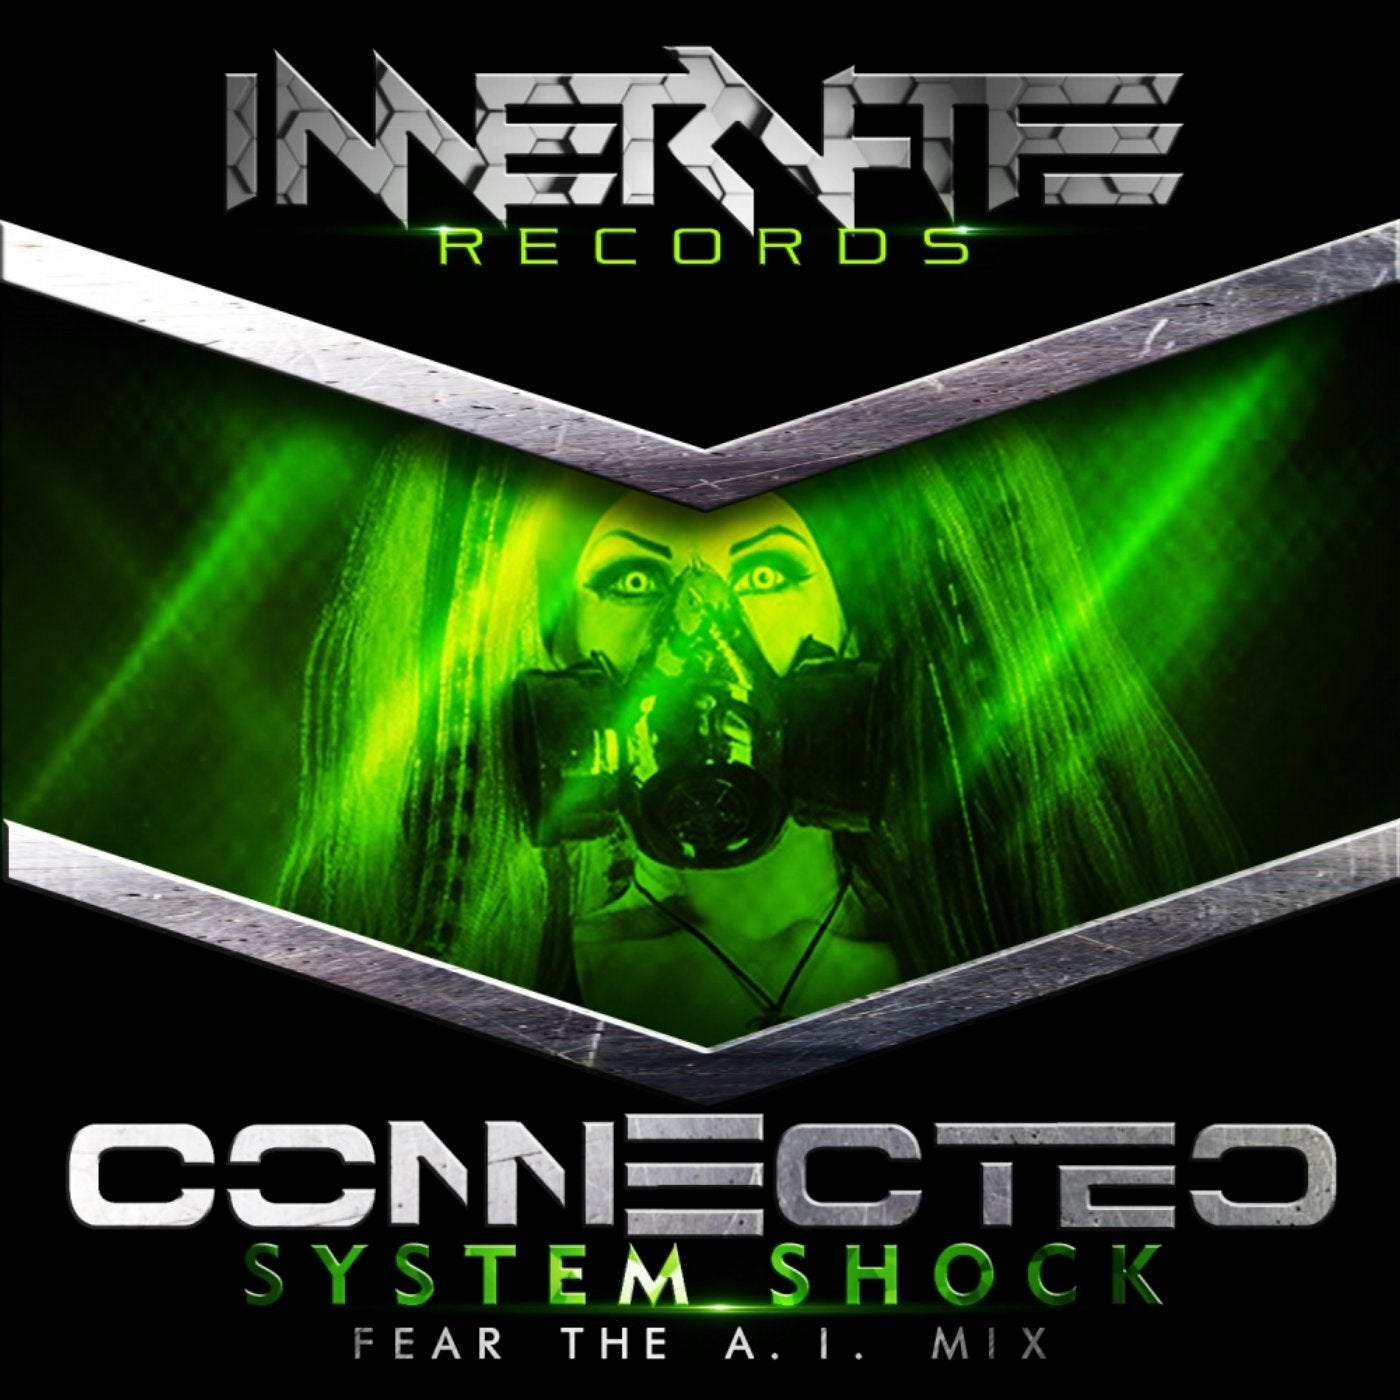 SystemShock